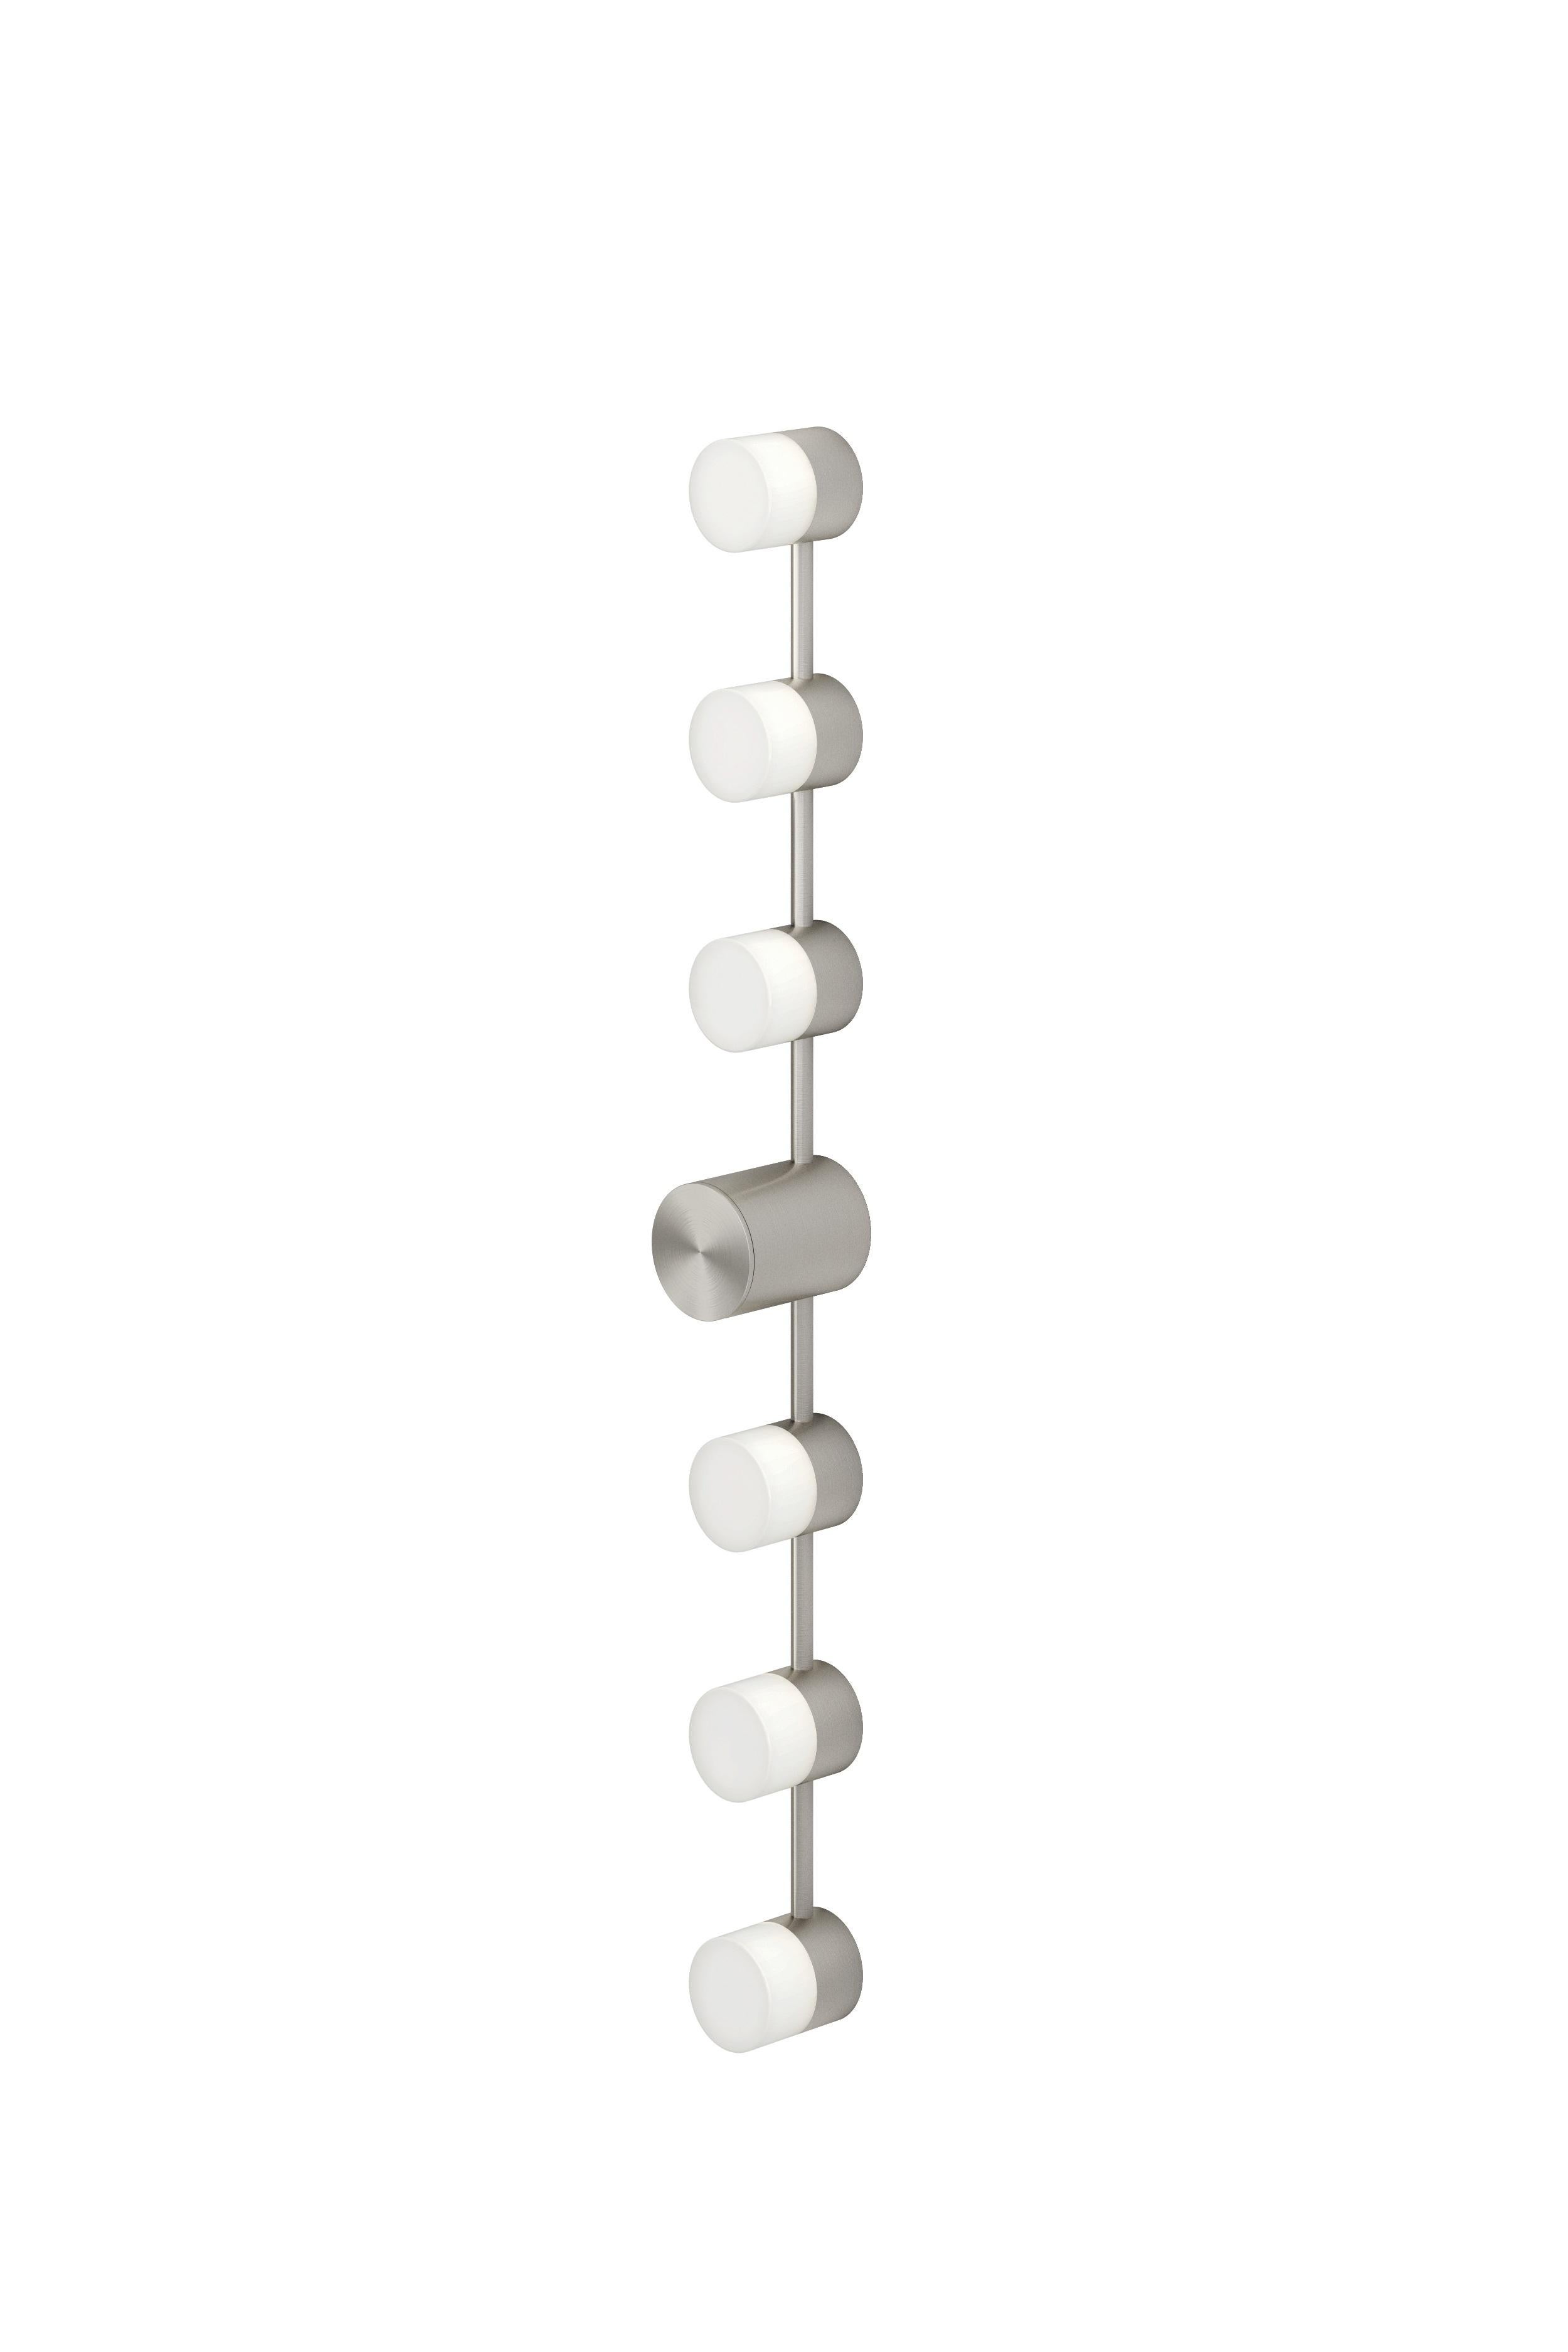 IP Backstage L6 satin nickel wall light by Emilie Cathelineau
Dimensions: D 72.3 x W 6.3 X H 9.2 cm
Materials: solid brass, Satin Nickel
Others finishes and dimensions available.

All our lamps can be wired according to each country. If sold to